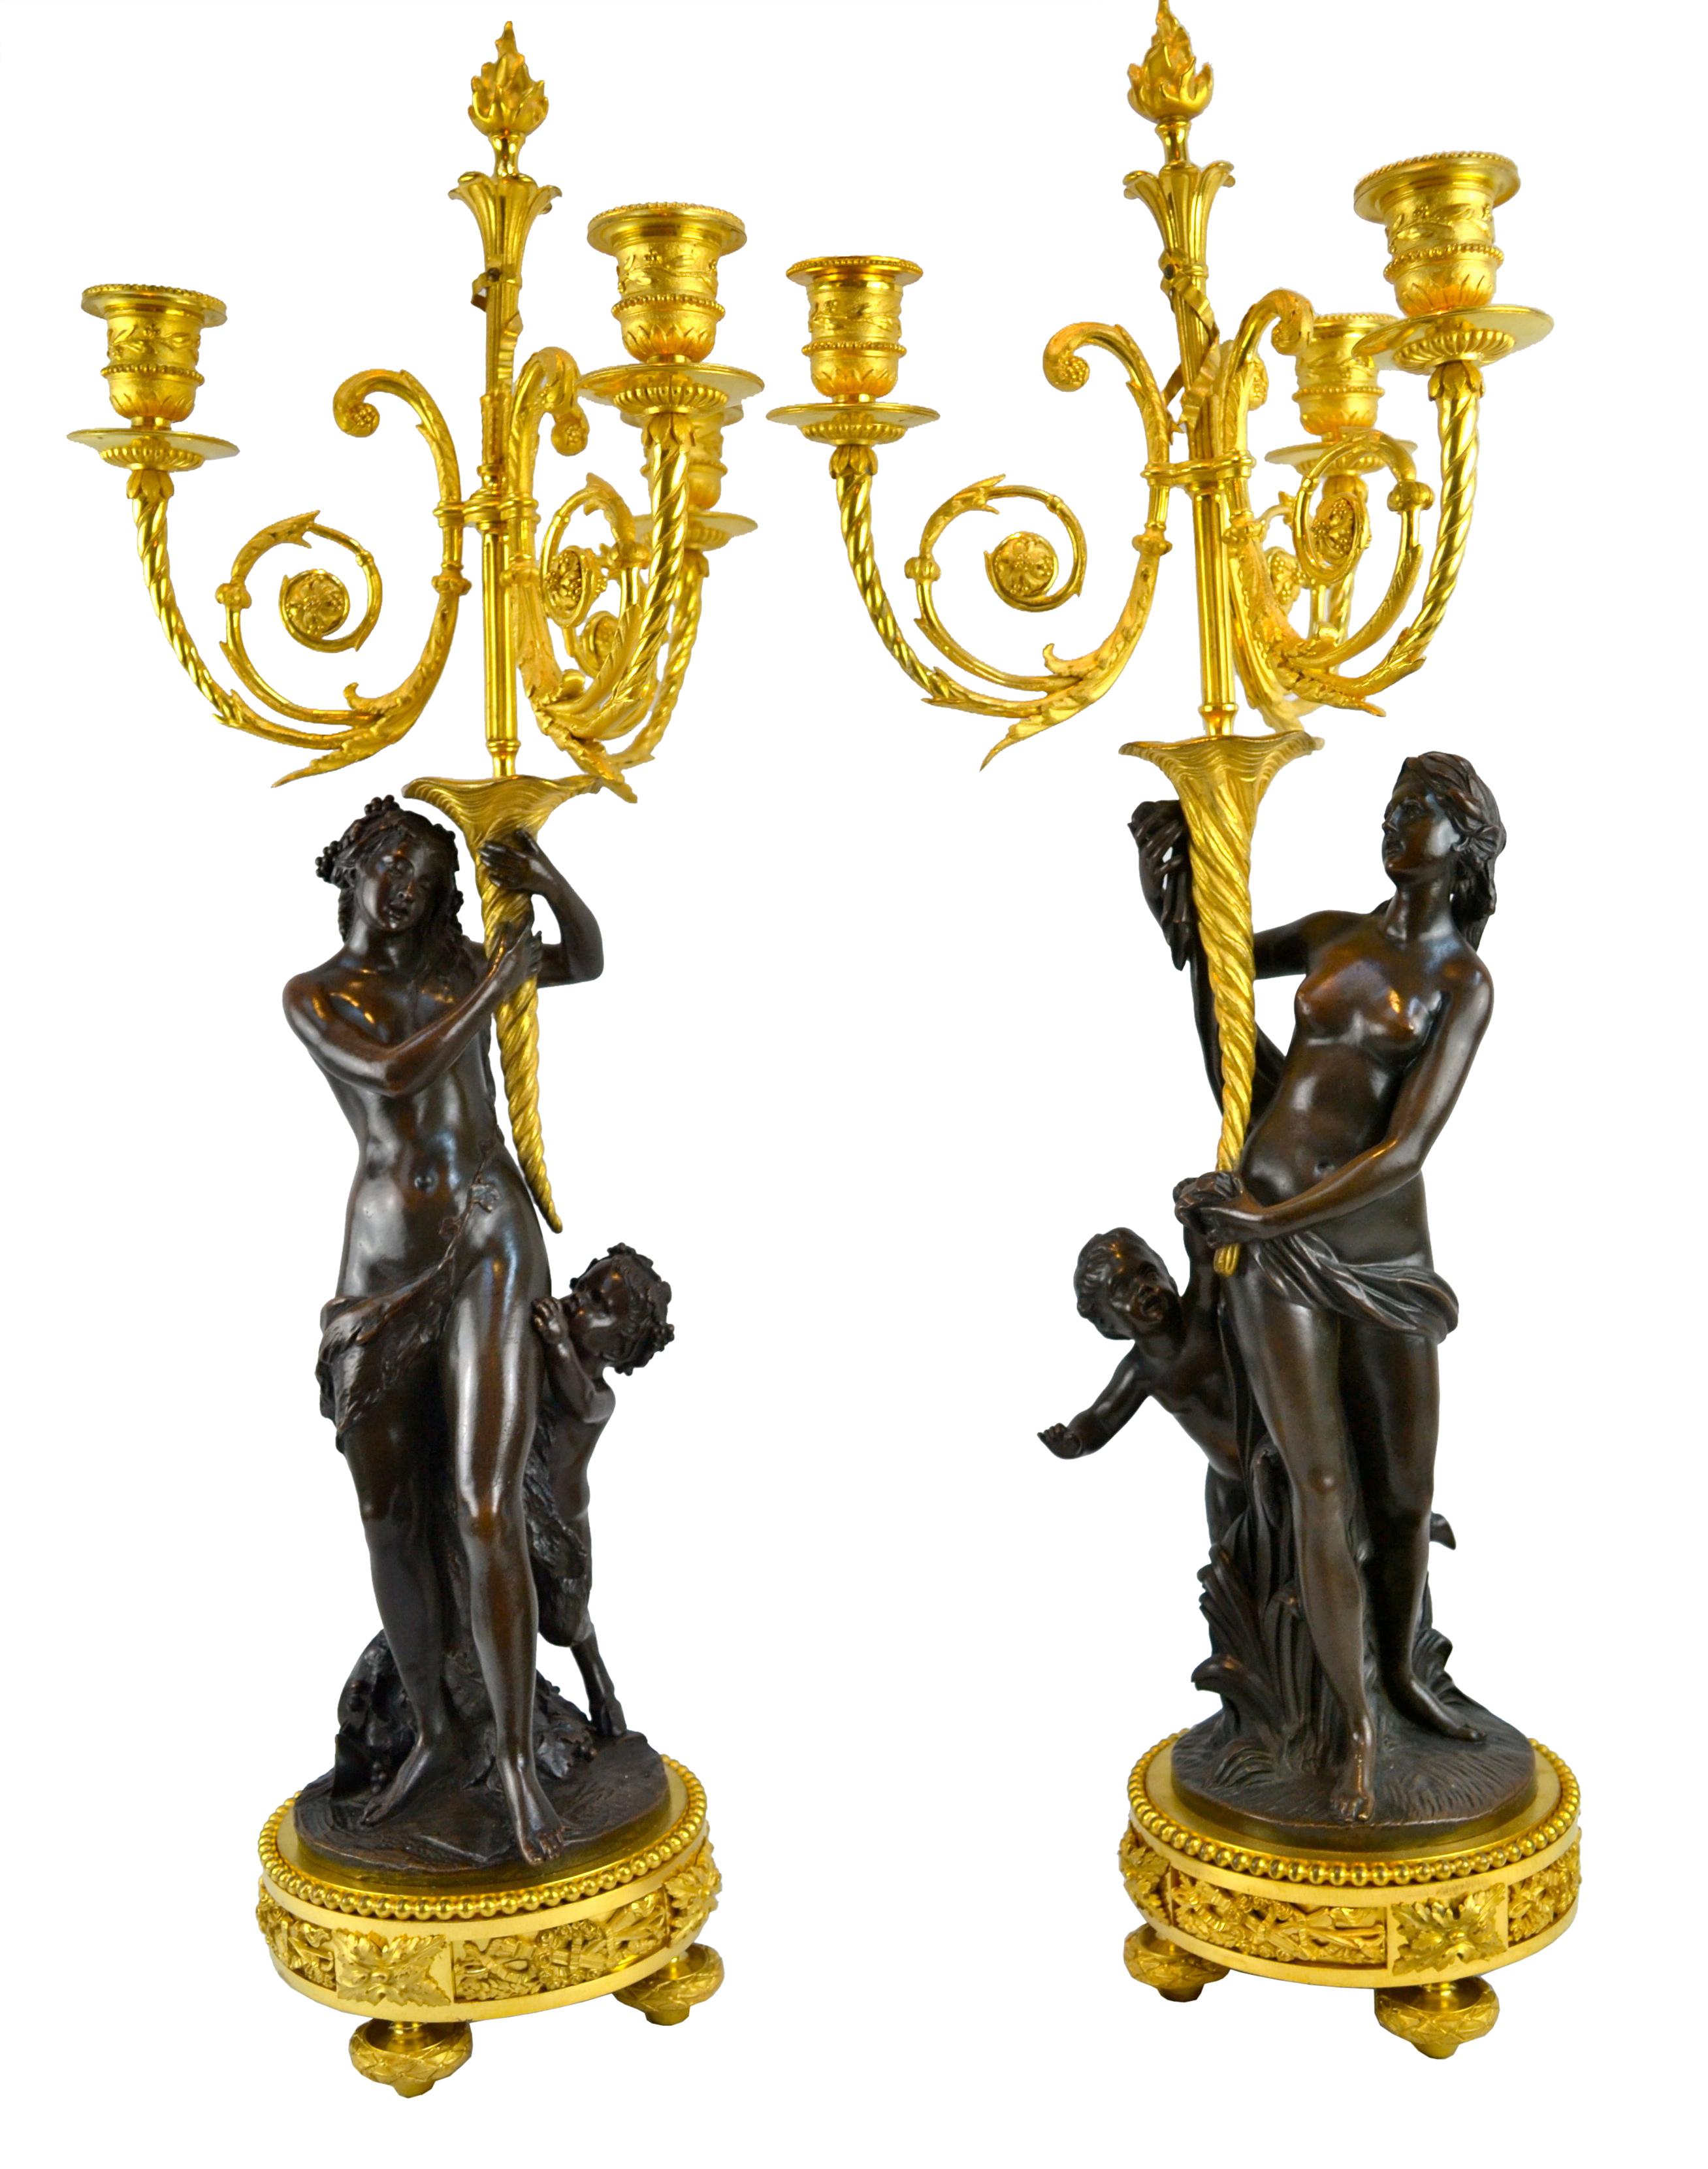 A pair of Clodion inspired figural candelabra of the highest quality gilt and patinated chased bronze. Each show a standing classically draped semi-nude maiden with a hoof footed infant satyr standing behind and pulling on the maidens' robes for